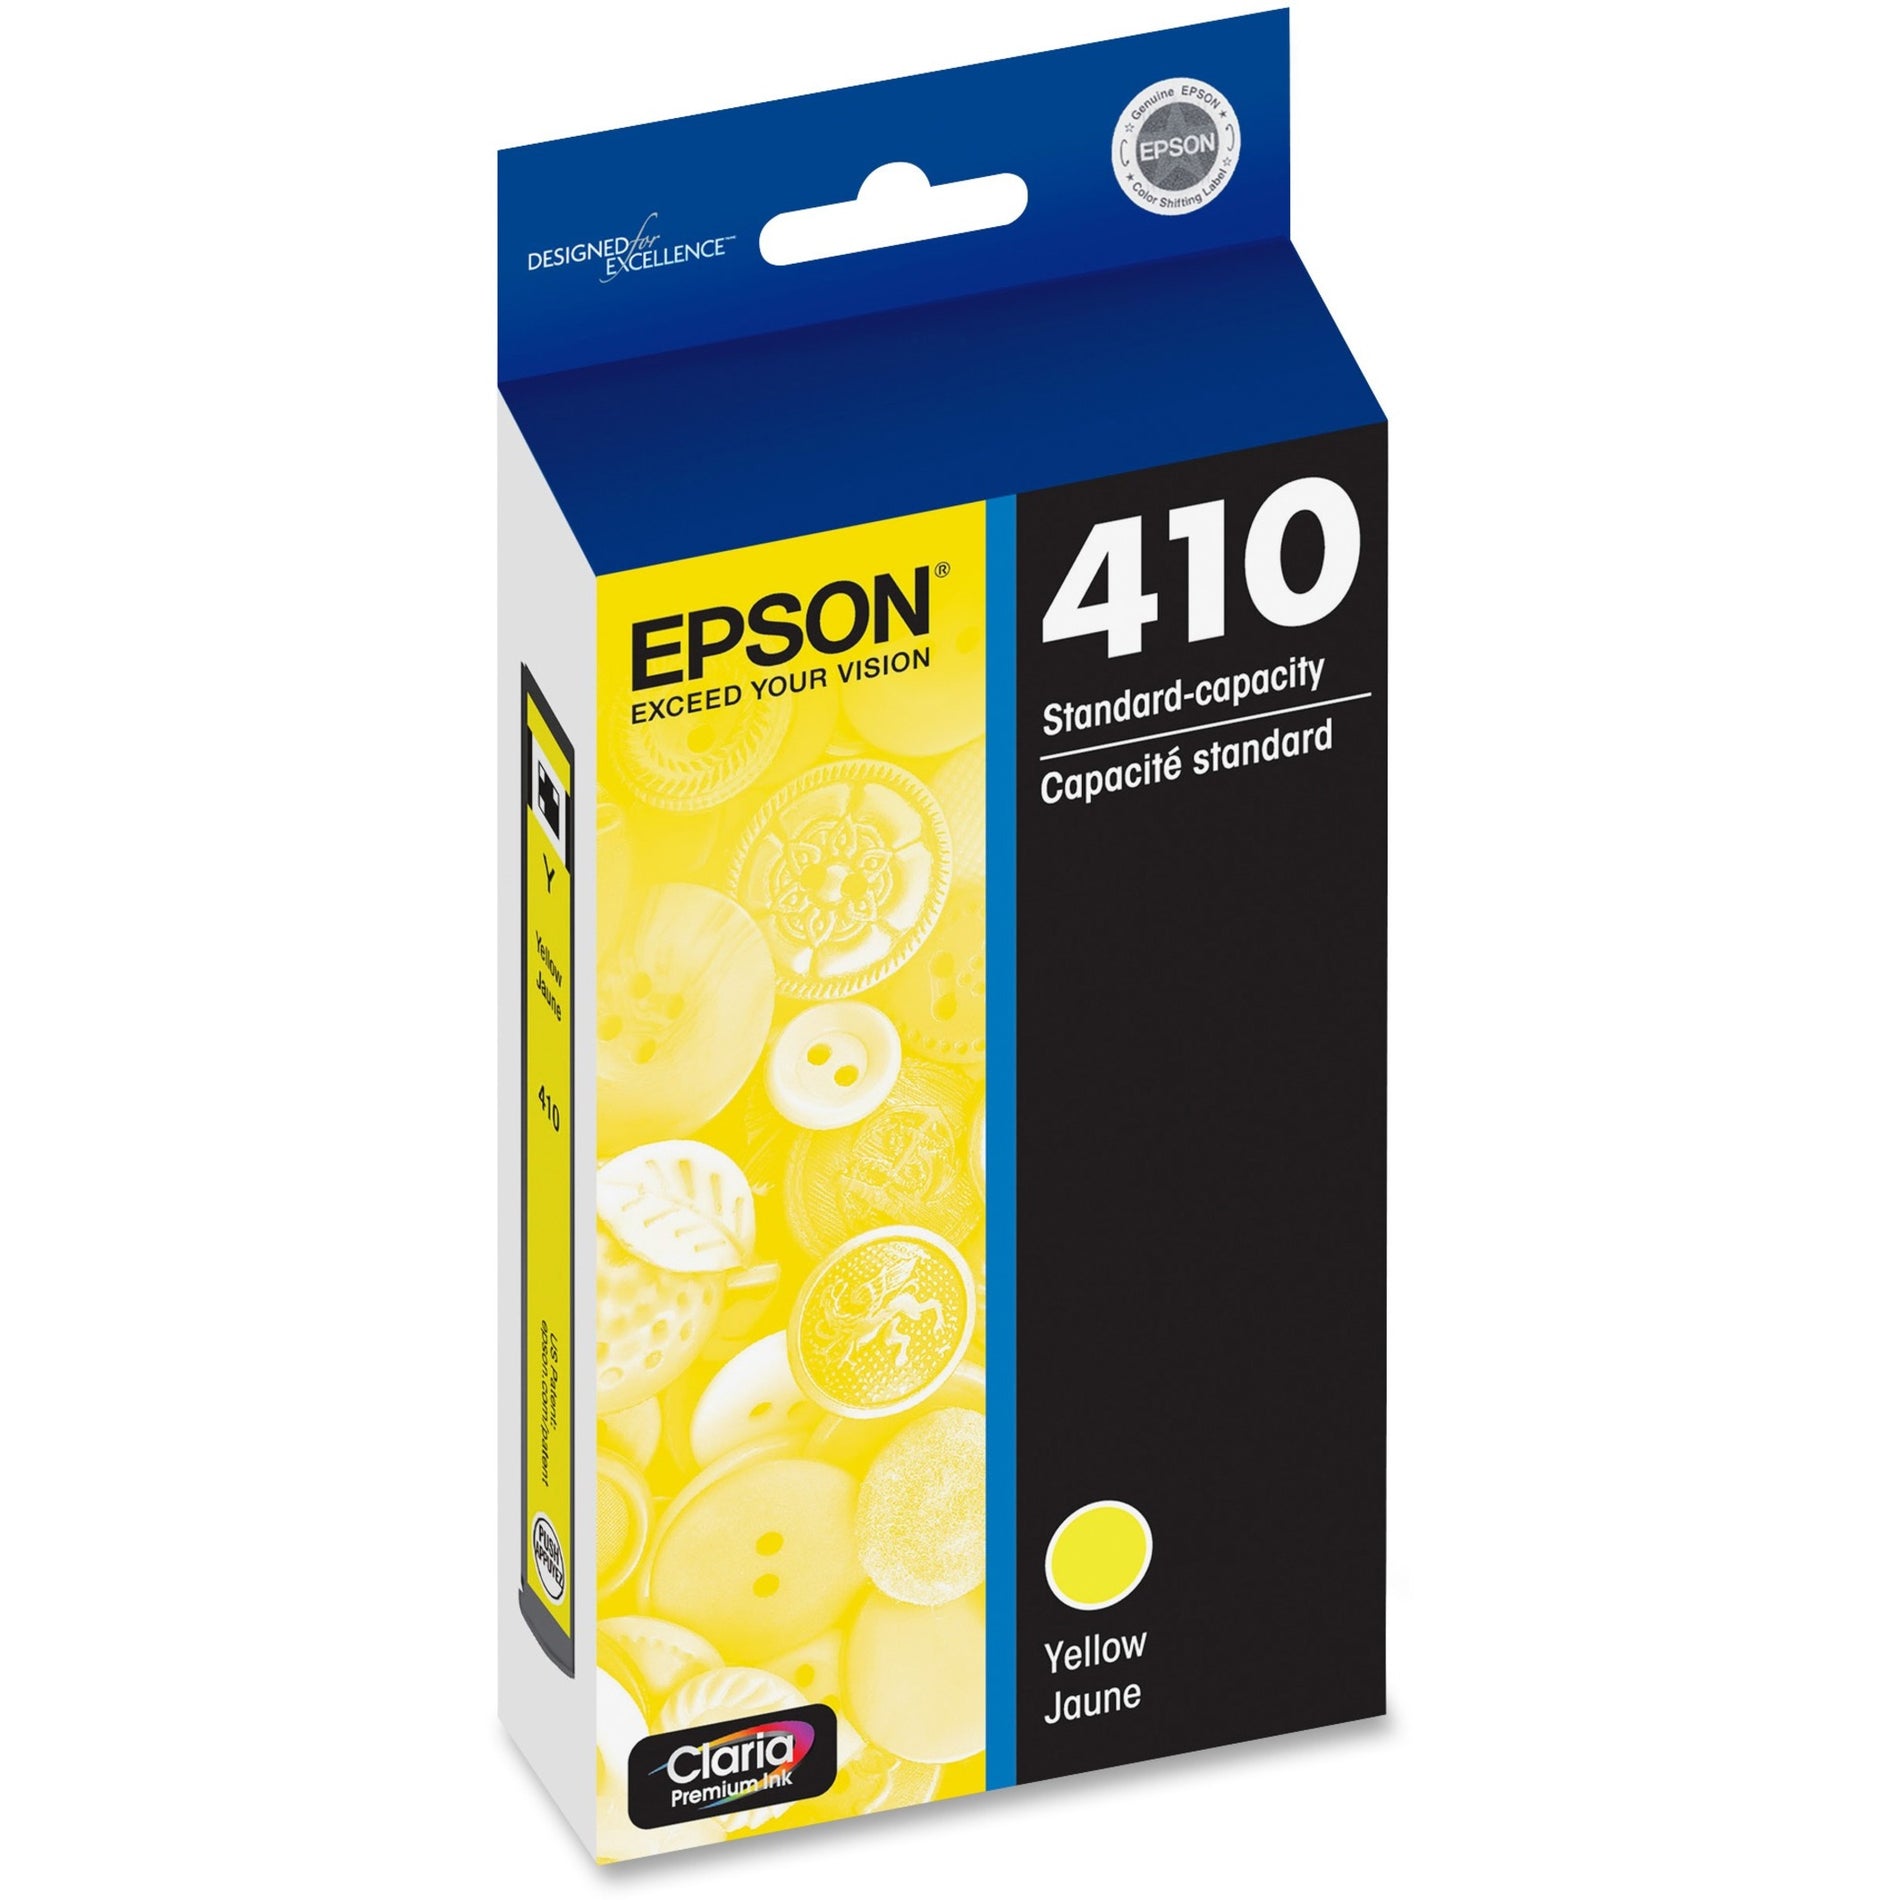 Epson T410420-S 410 Yellow Ink Cartridge, 300 Page Yield